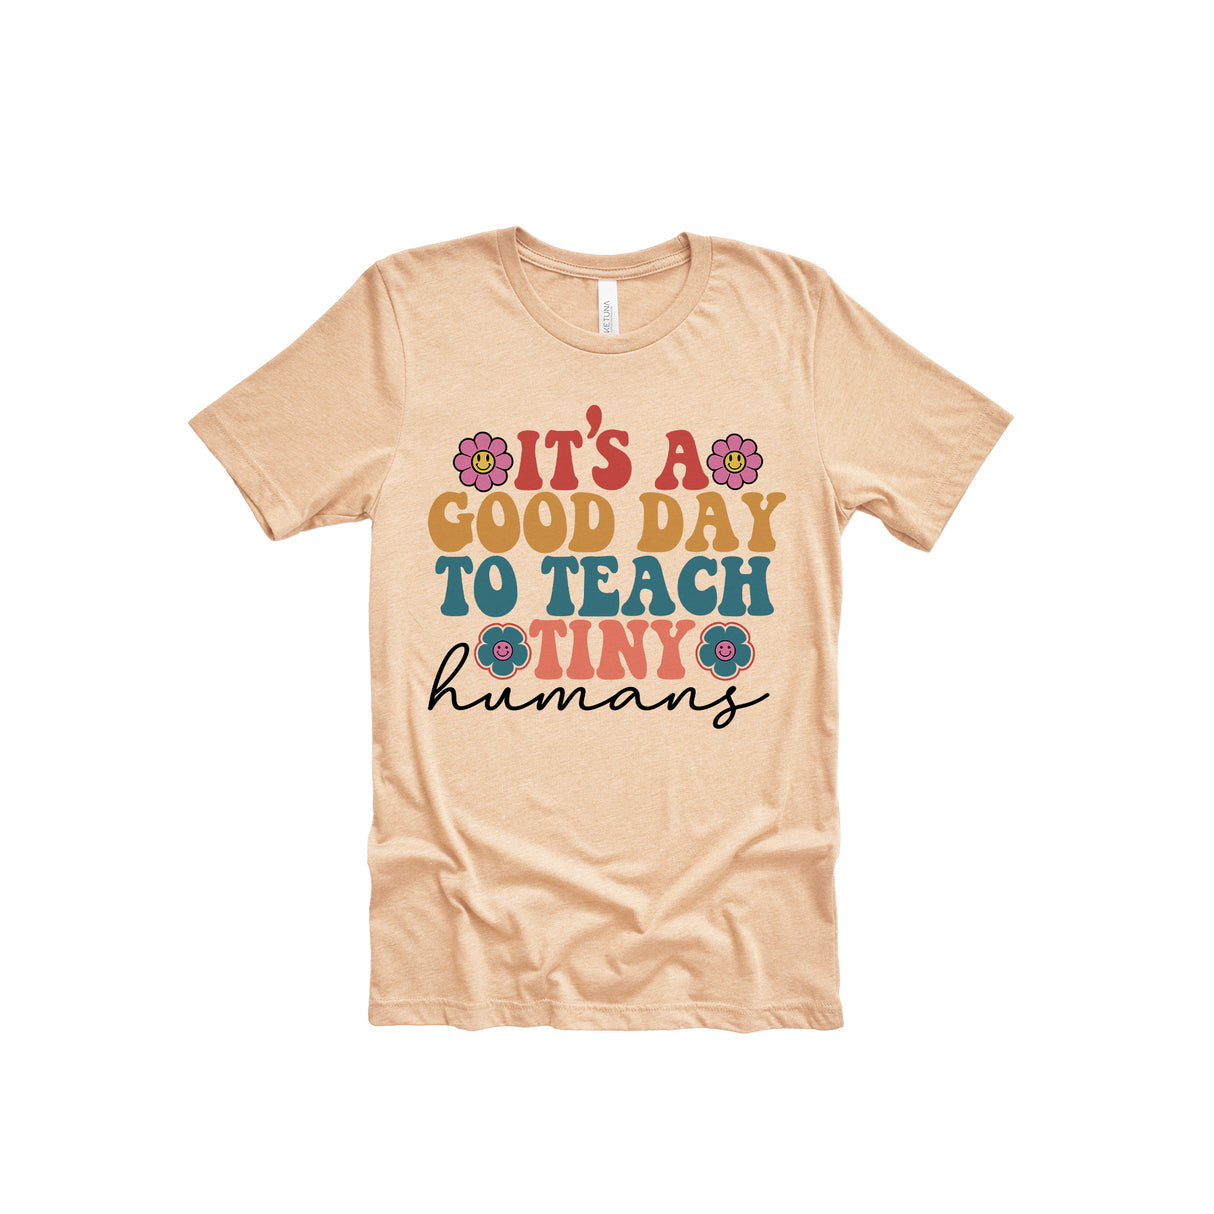 It's A Good Day To Teach Tiny Humans Adult T-Shirt